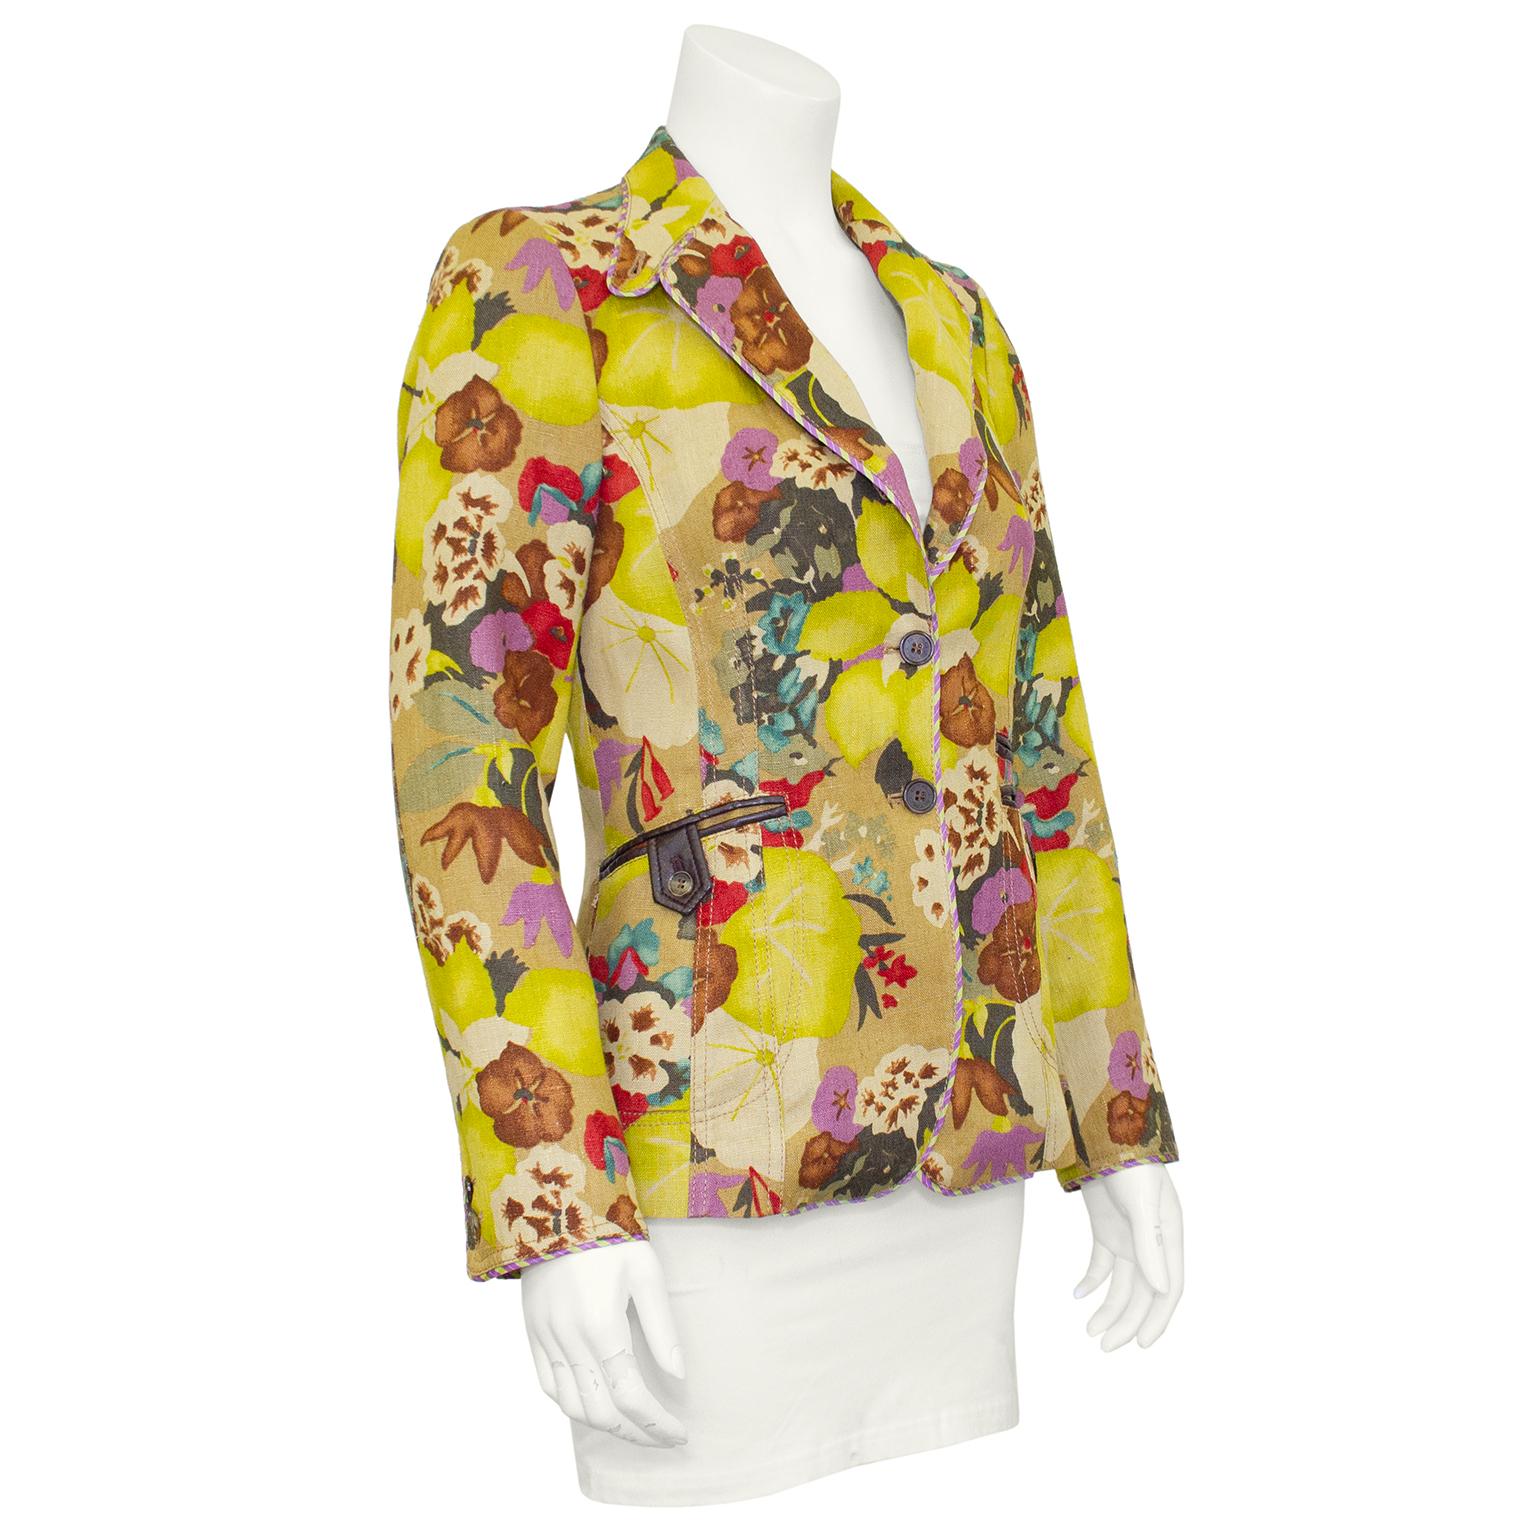 Bright and colourful Etro linen blazer from the earl 2000s. Linen with all over floral print in tones of mustard yellow, light purple, red, khaki and brown. This blazer can be worn in two ways, with the notched collar open and laying flat, or closed